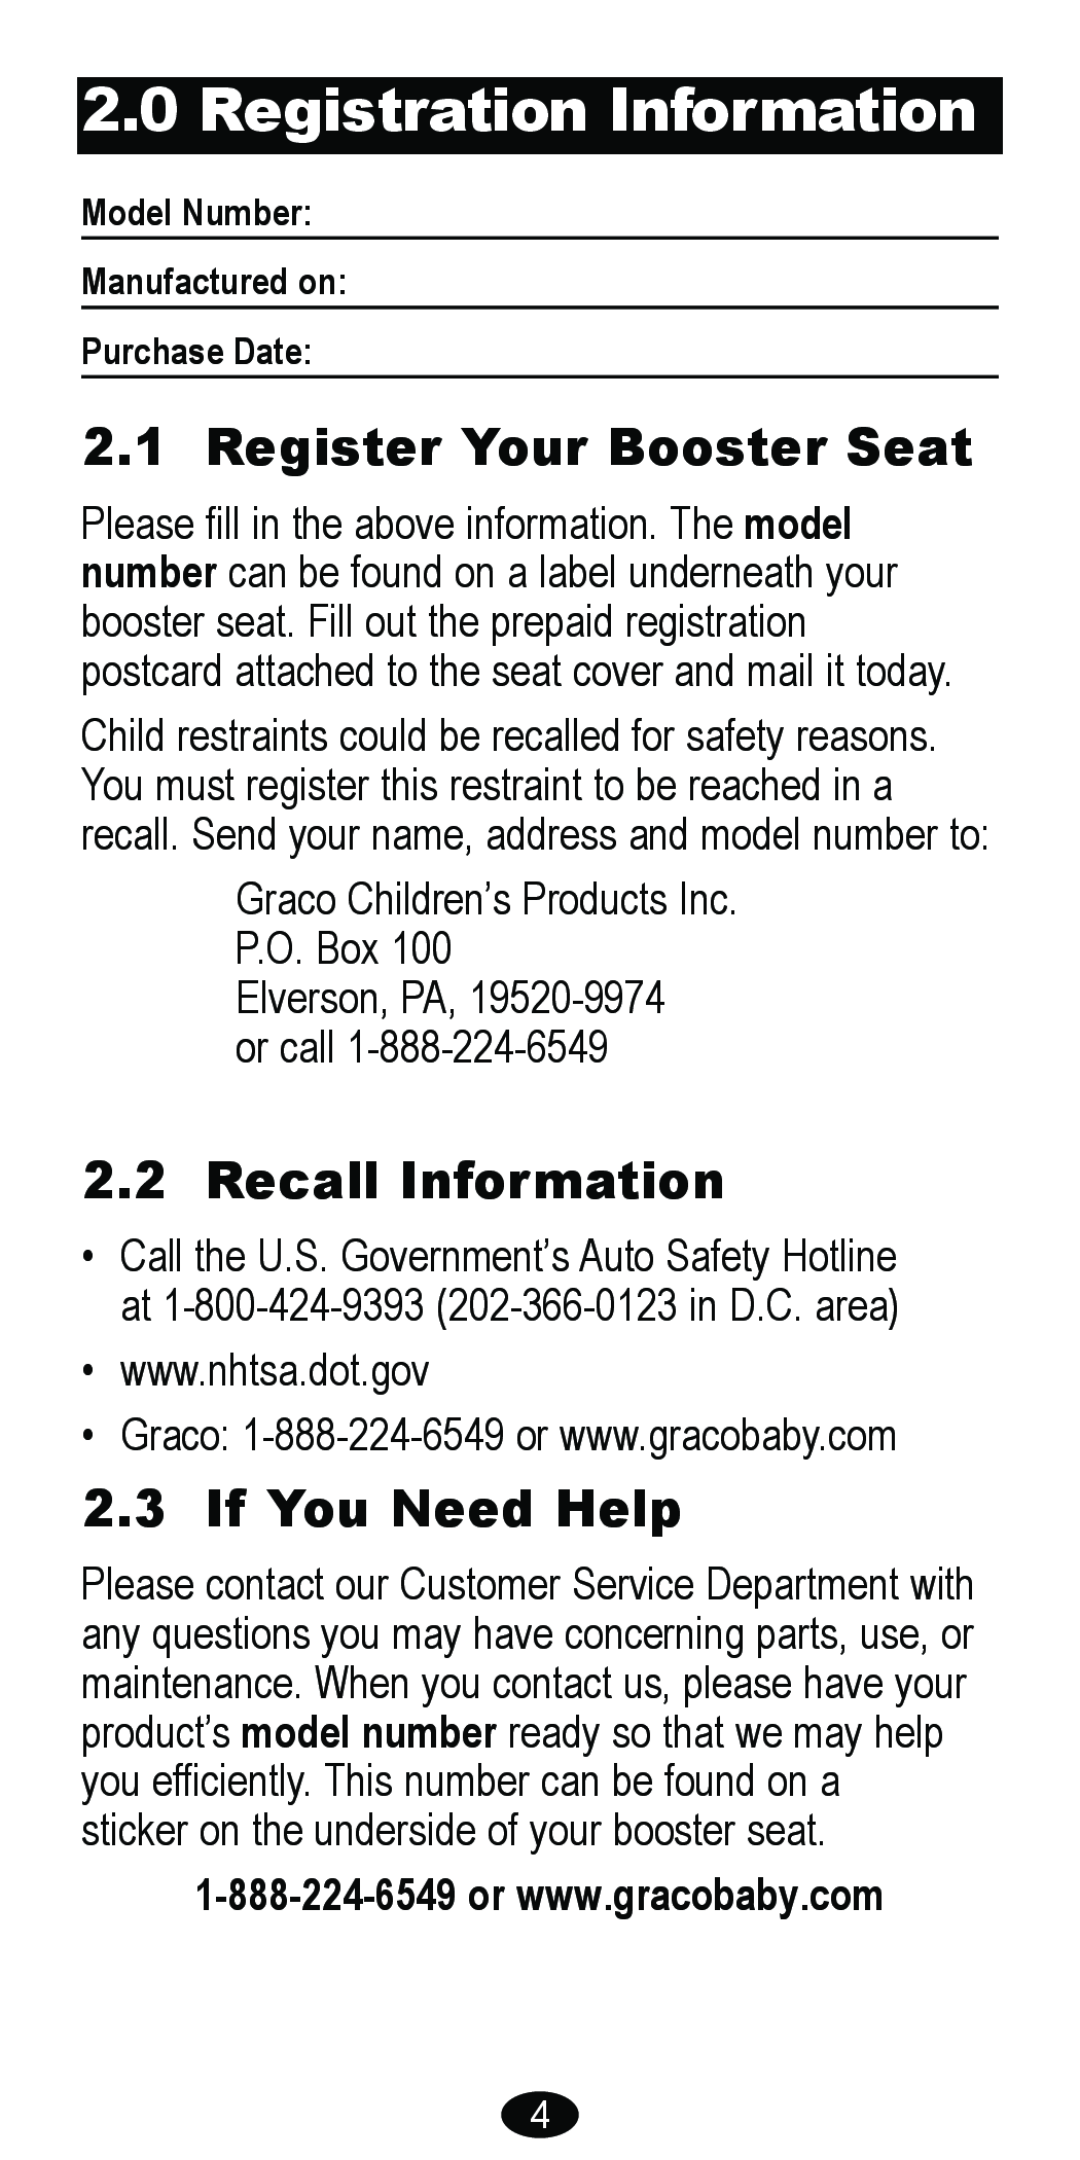 Graco 8481 owner manual Registration Information, Register Your Booster Seat, Recall Information, If You Need Help 